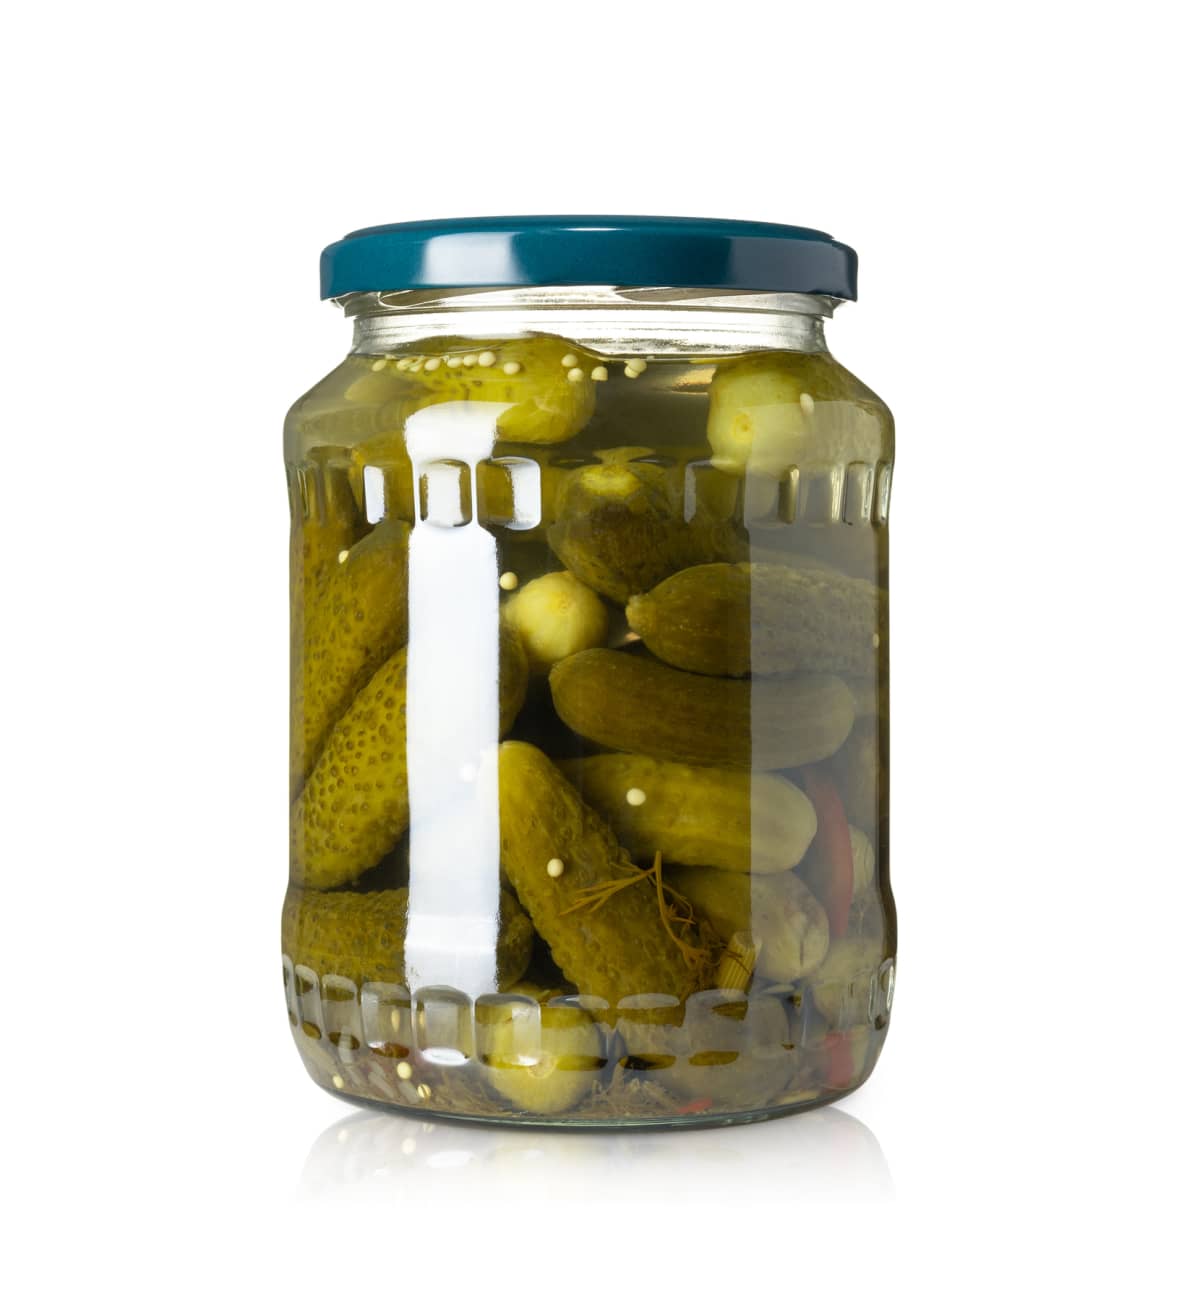 A jar of pickles with a blue lid against a white background